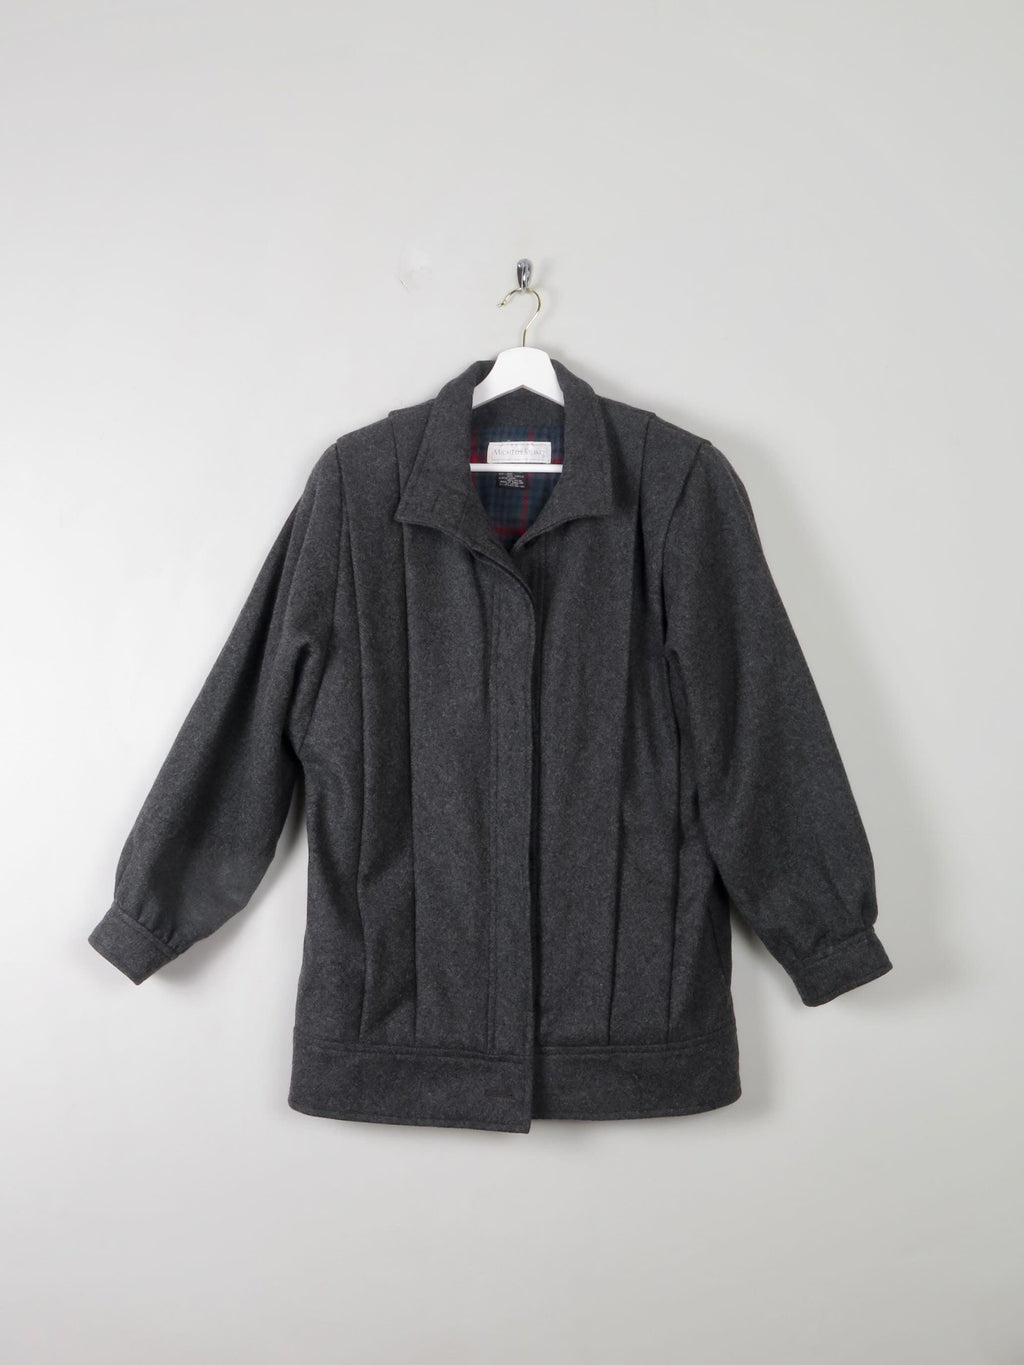 Women's Grey Wool Pleated Jacket S/M - The Harlequin